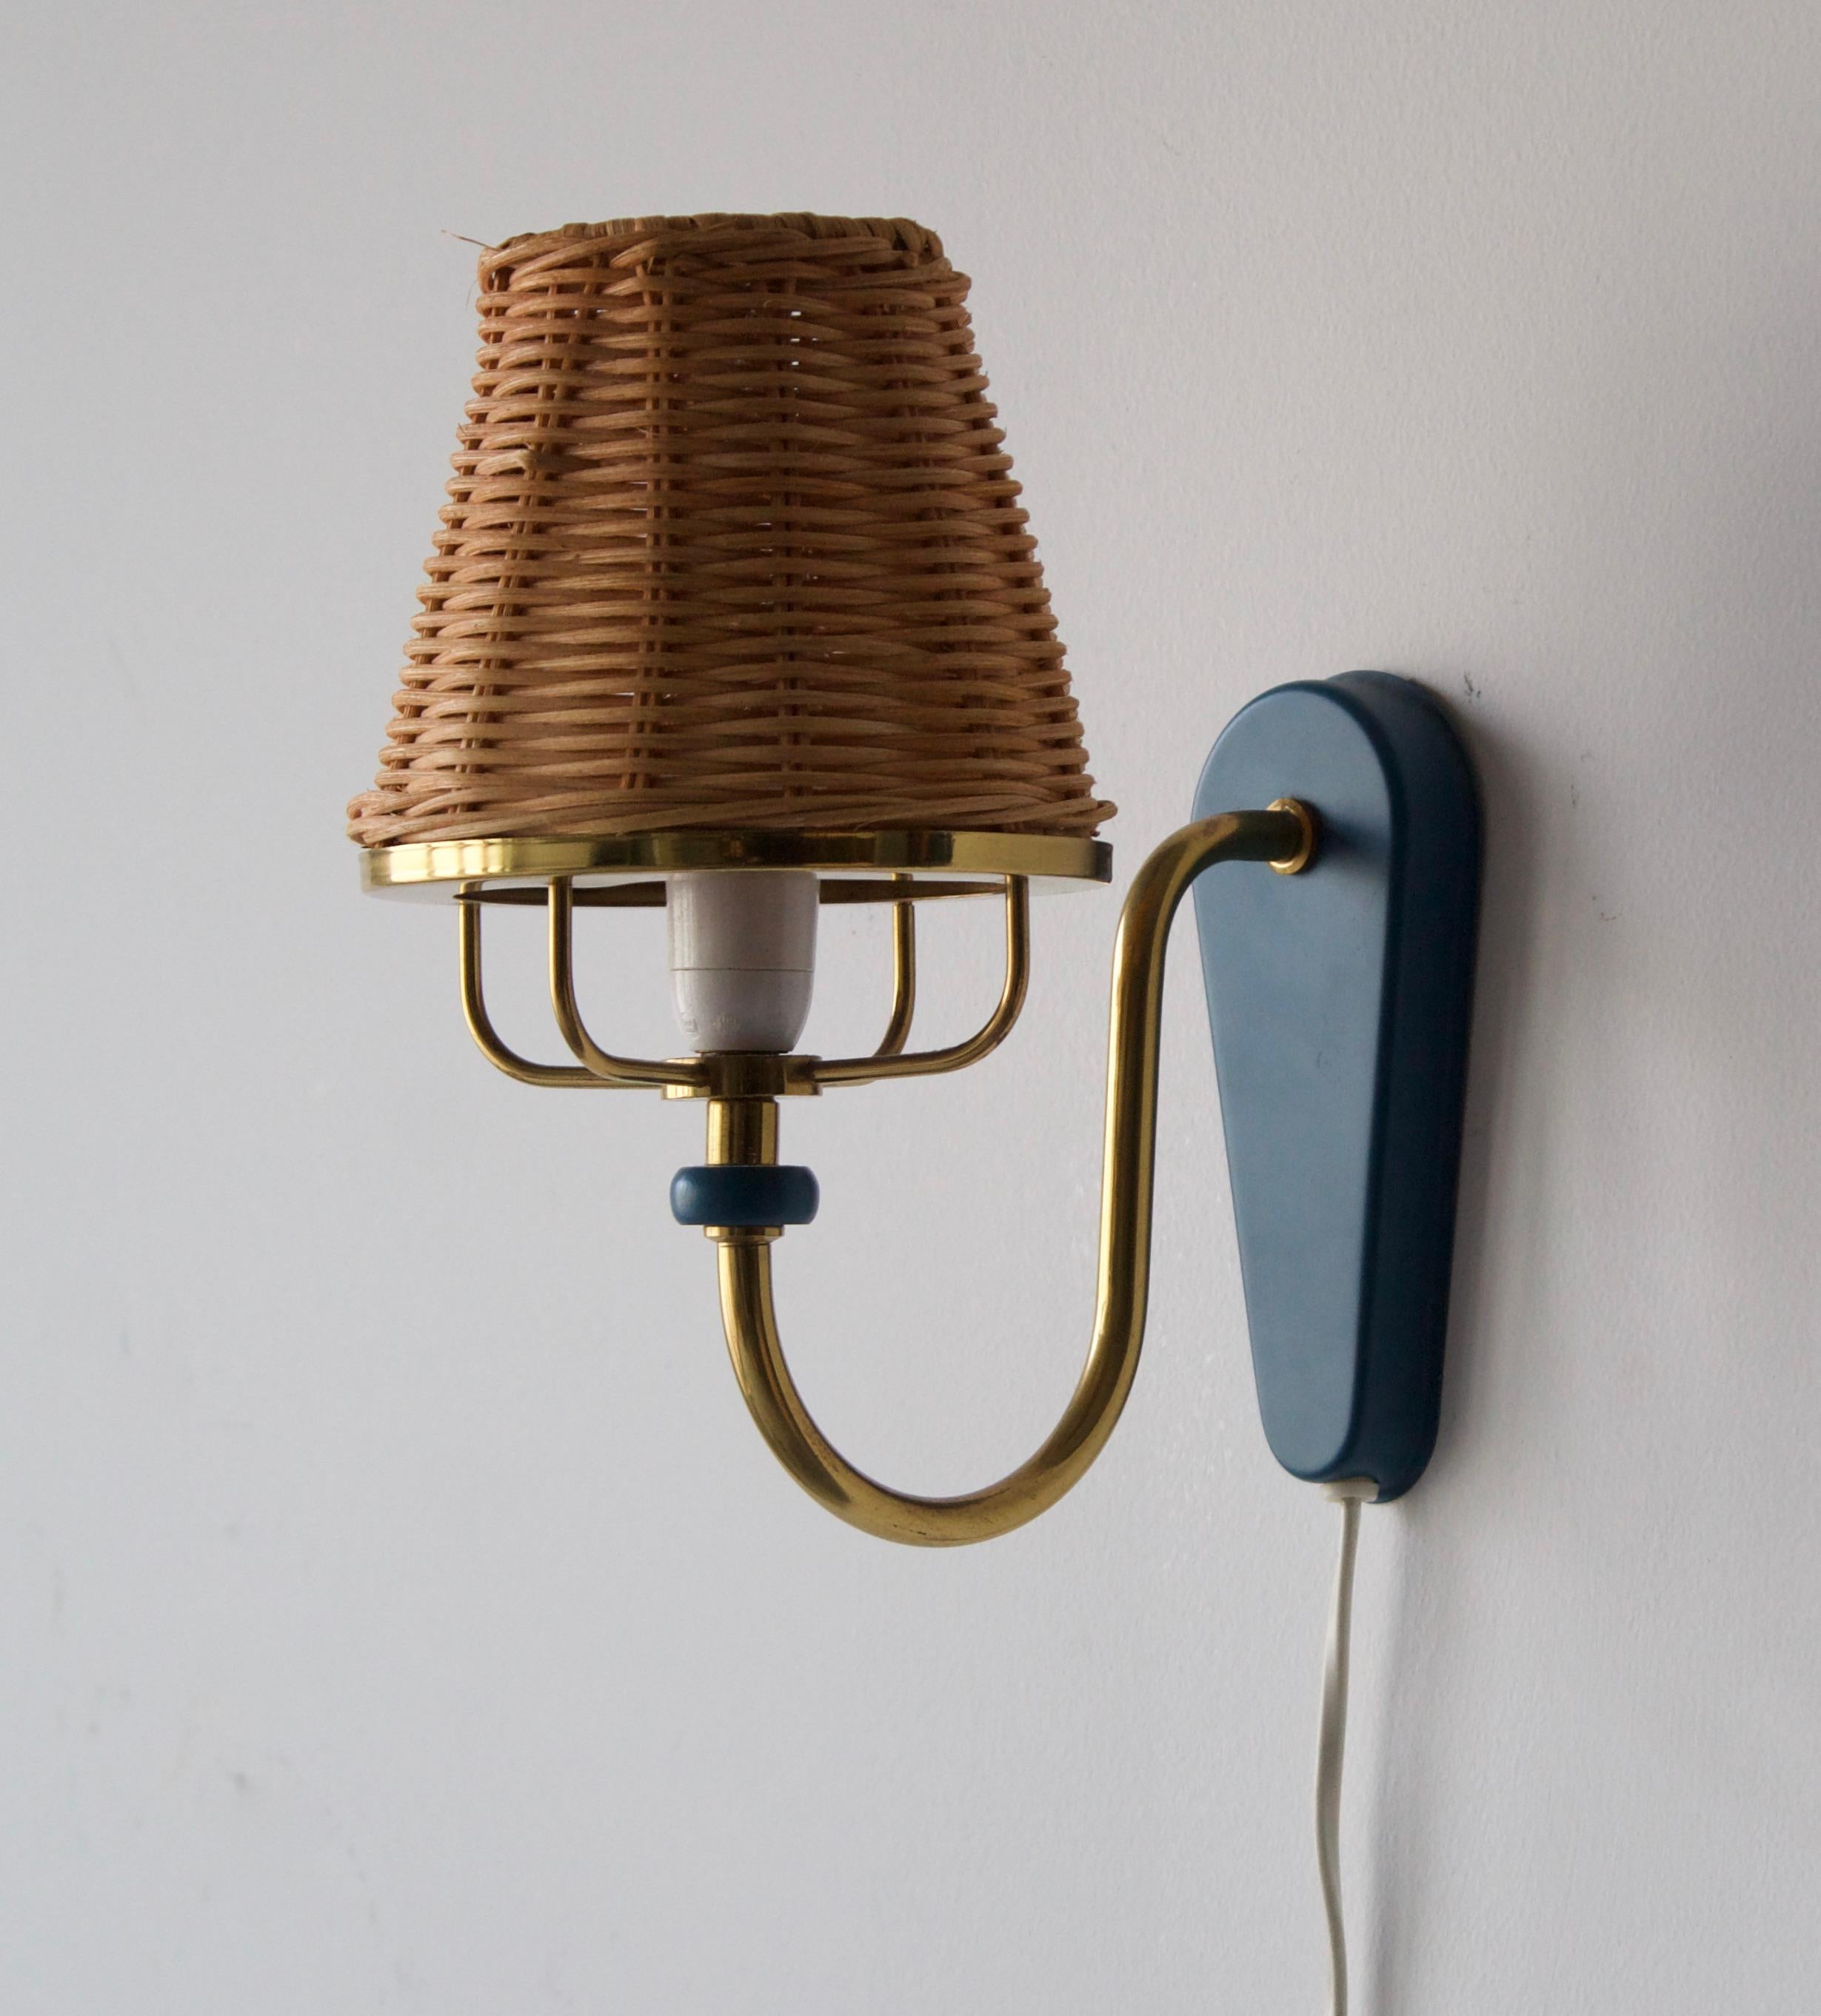 A pair of wall lights, designed and produced in Sweden, 1970s. In brass, blue lacquered metal, assorted rattan lampshades.

No stated max wattage on fixture, not UL-listed. Currently configured per original execution as plug-in. Please consult